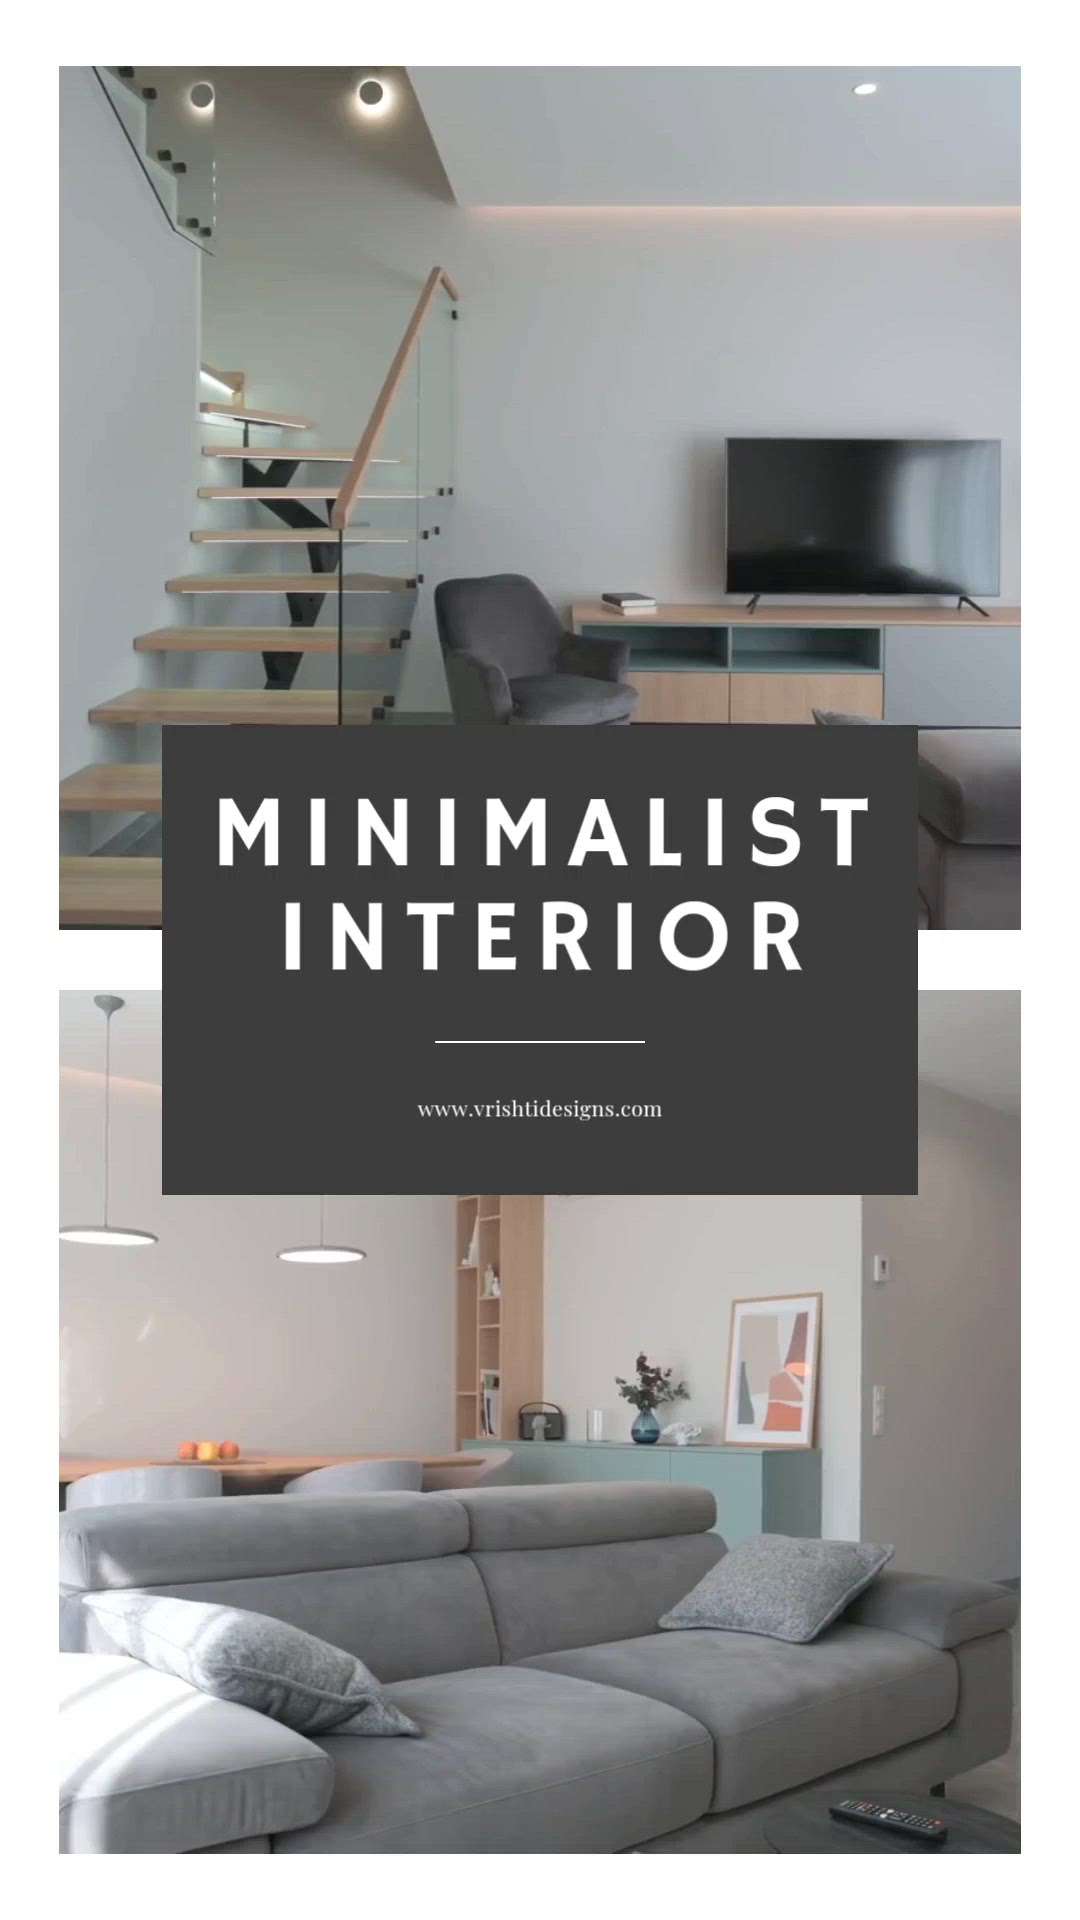 Less is more with our latest reel showcasing minimalist interior design. From clean lines to a neutral color palette, we're showing you how simplicity can be stunning. Explore the beauty of a clutter-free home with Vrishti Designs. #VrishtiDesigns #MinimalistInteriors #SimplicityIsBeauty #InteriorInspiration #HomeDecor #furniture #minimaliststyle  #InteriorDesigner